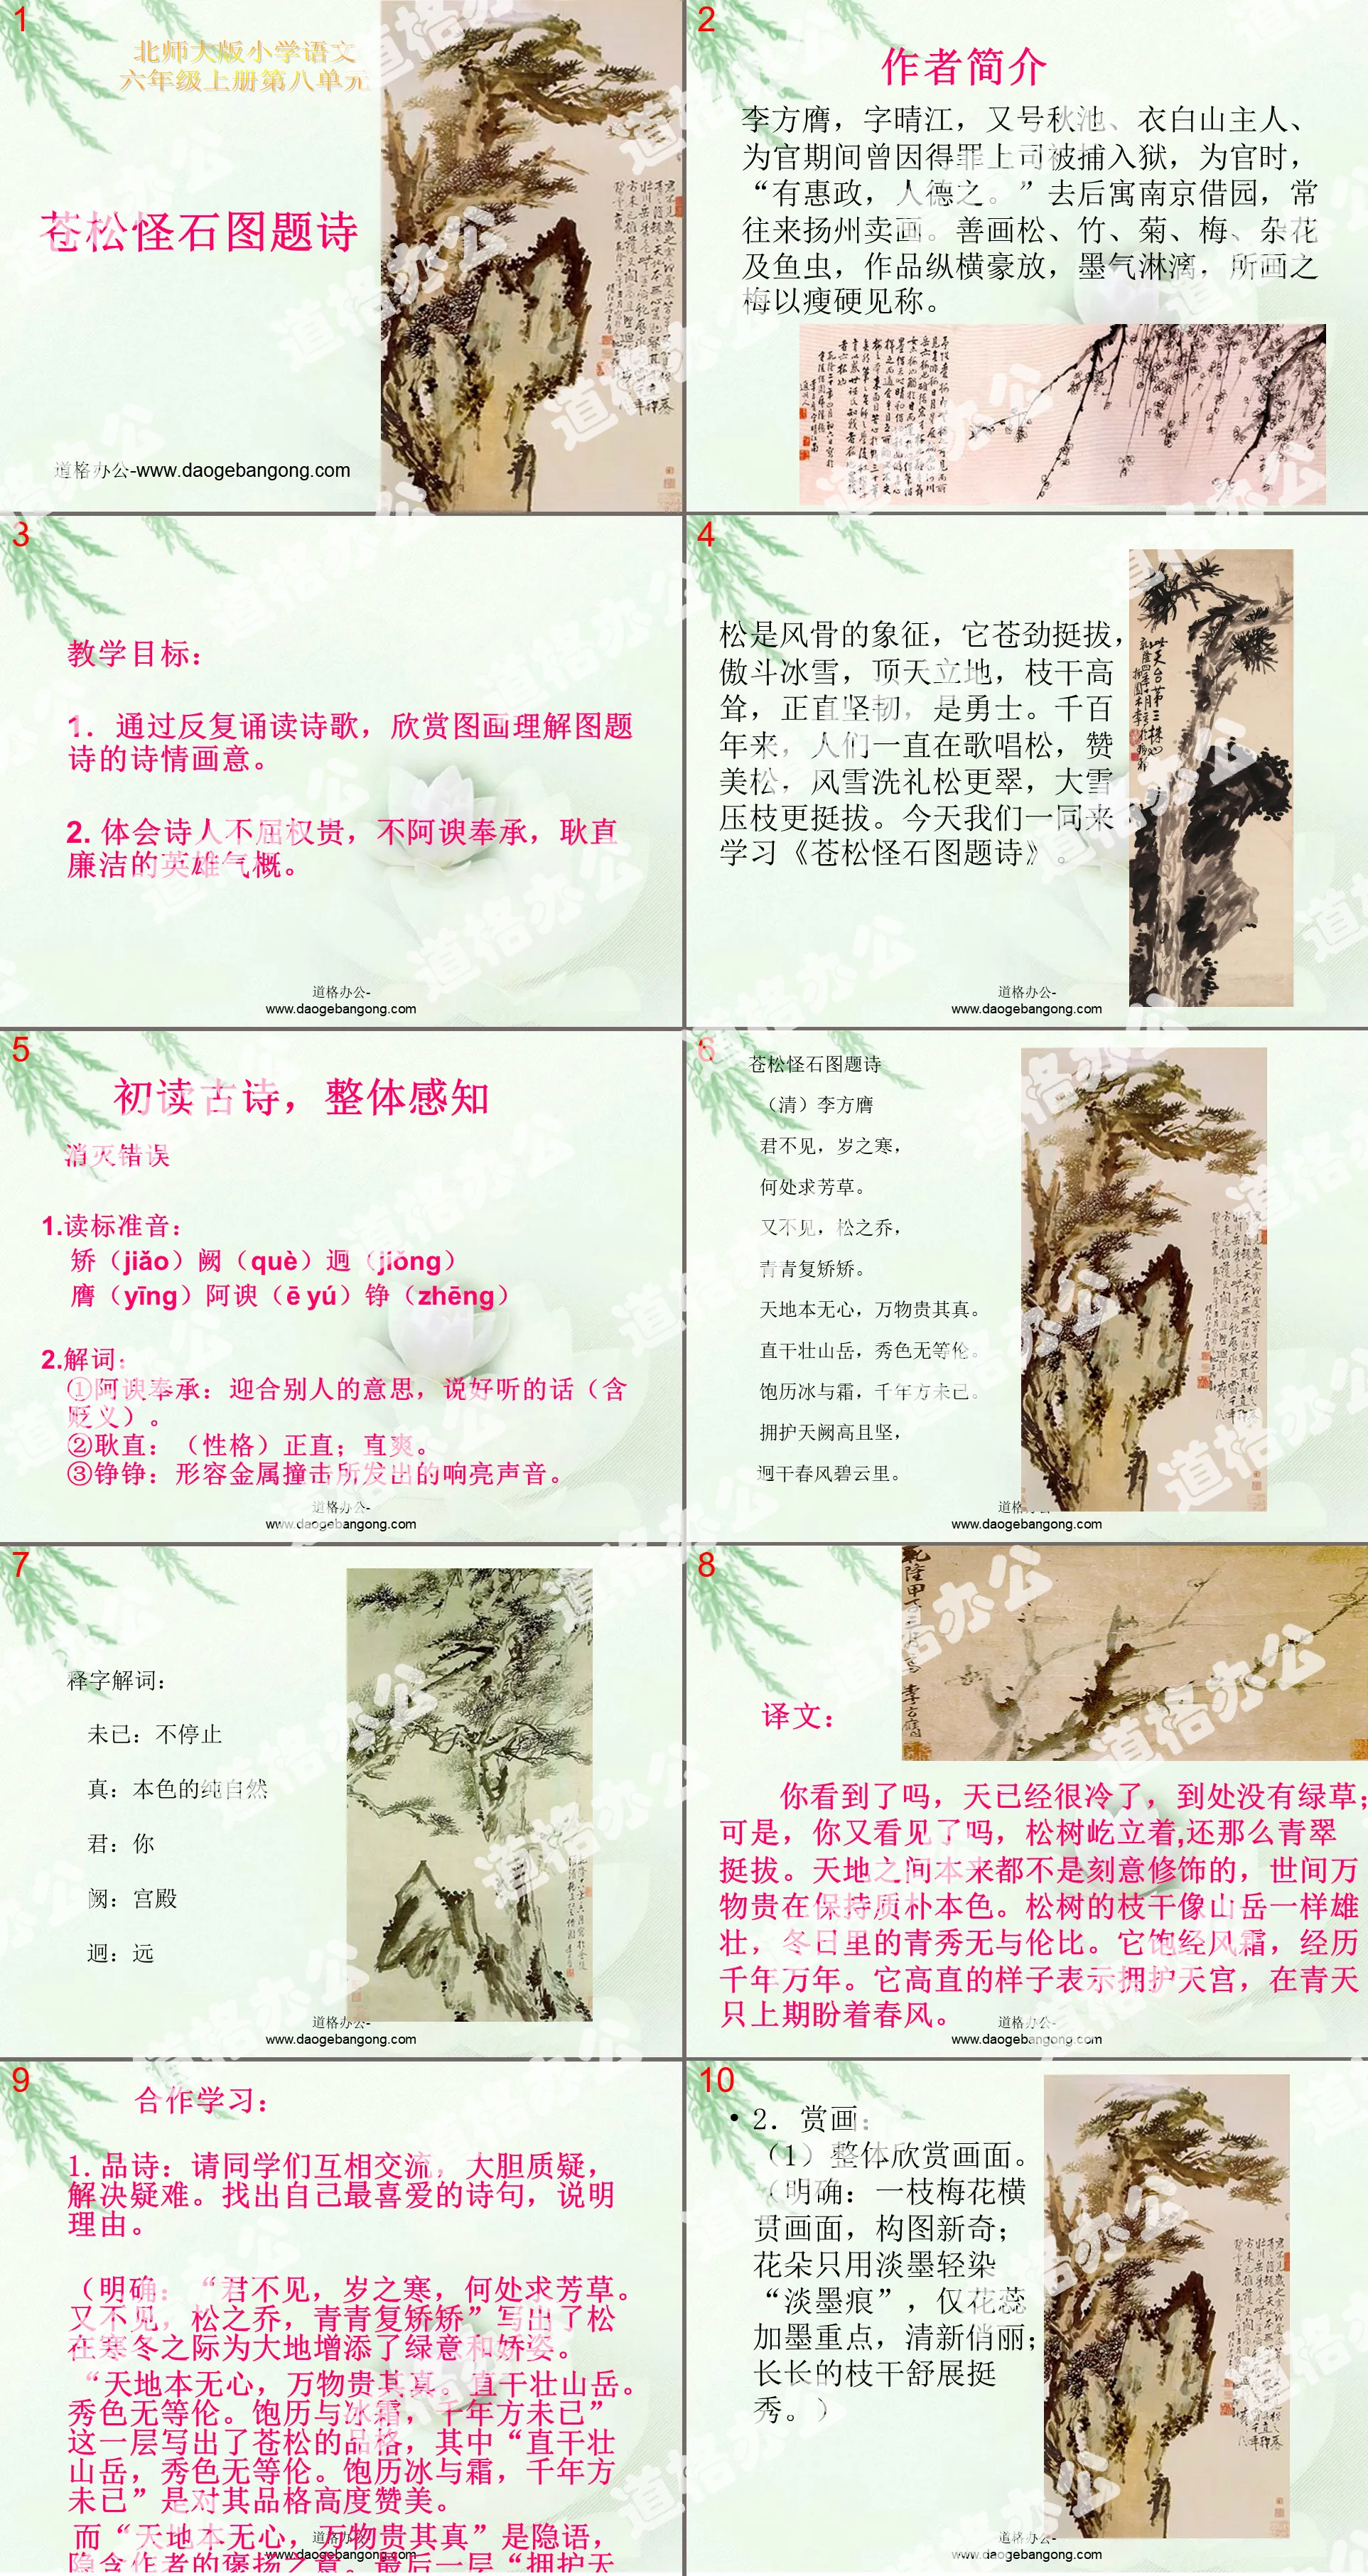 "Poem with Pictures and Inscriptions on Green Pines and Strange Rocks" PPT courseware